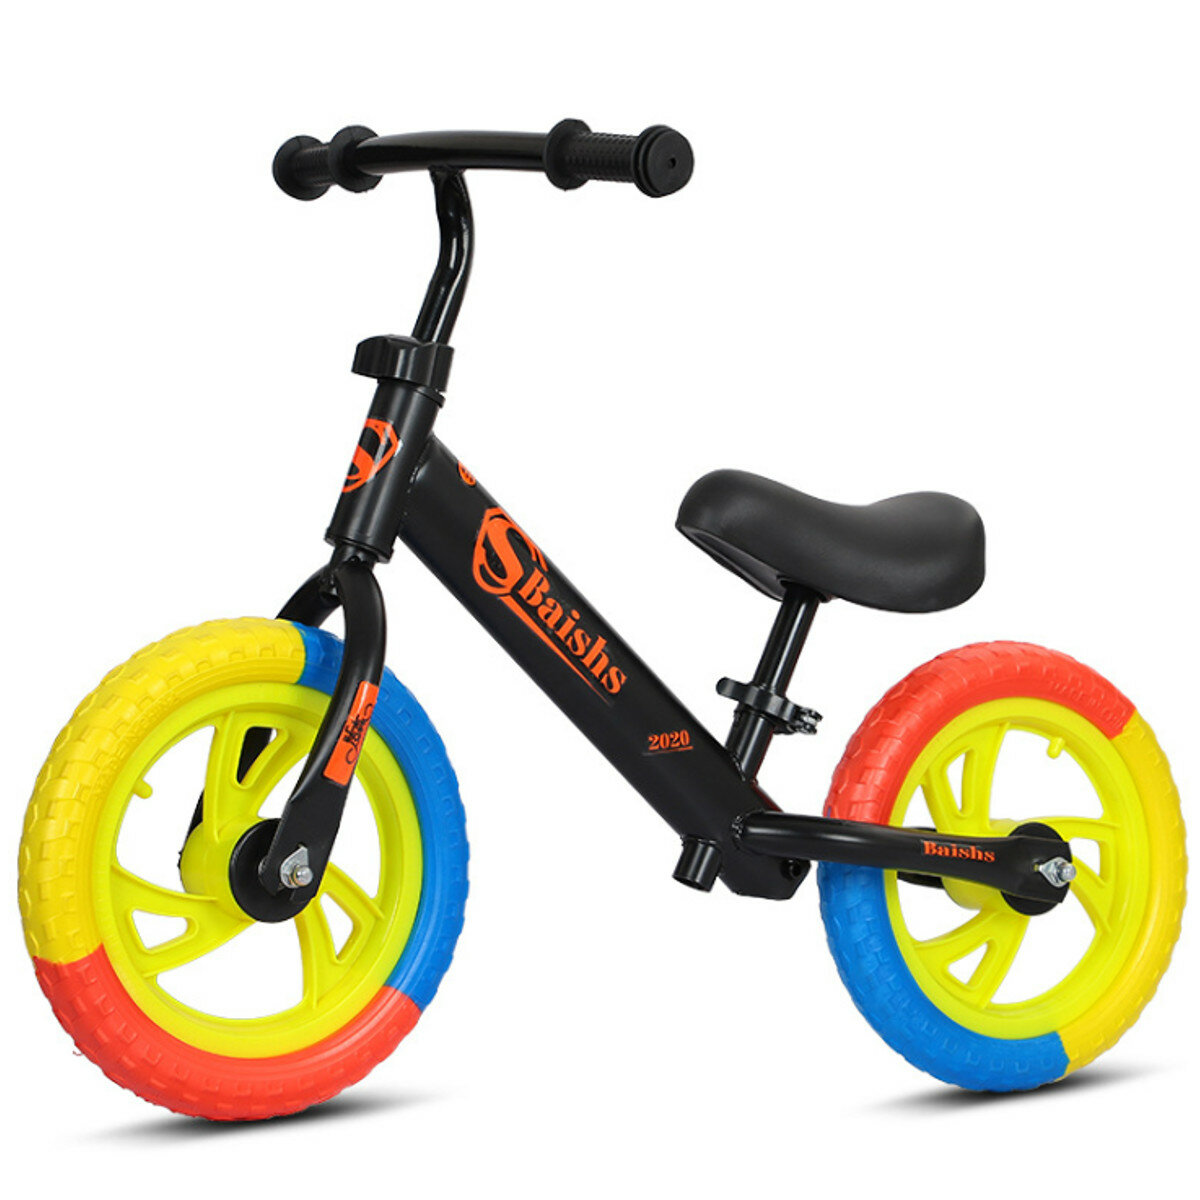 Image of 11" Sport Balance Bike Toddler Training Bike / Kids Push Bikes / No Pedal Scooter Bicycle for Ages 24 Months to 5 Years